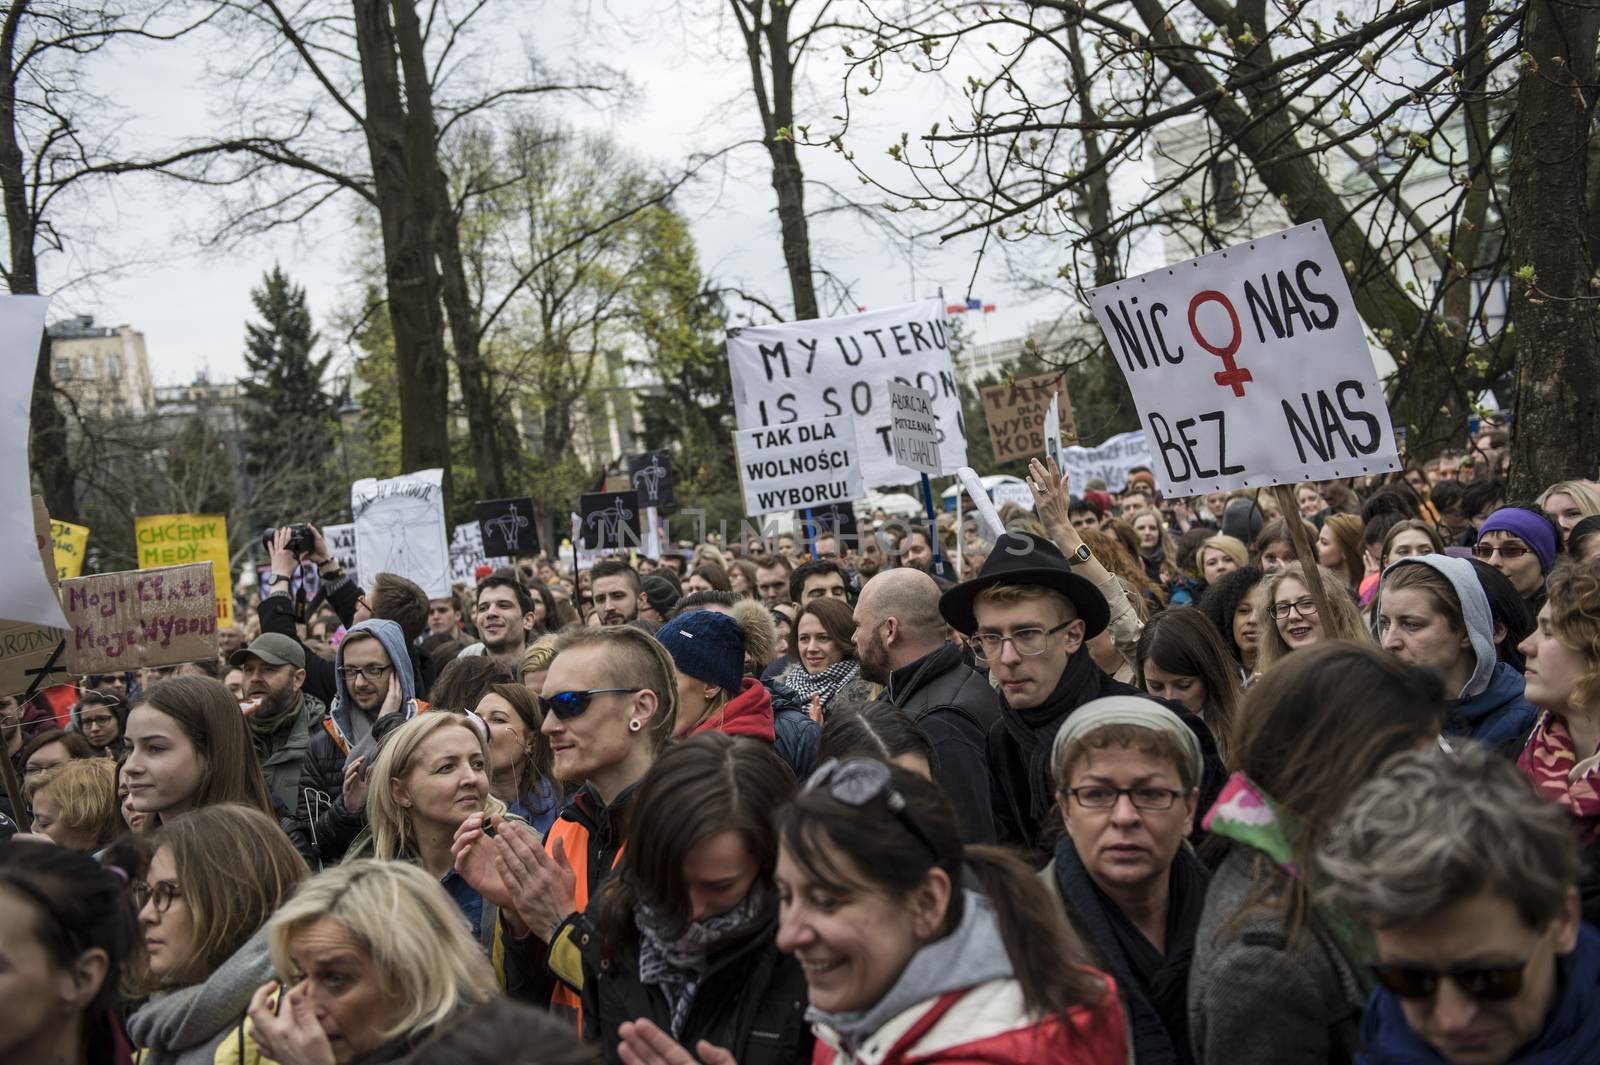 POLAND, Warsaw: People attend an anti-government and pro-abortion demonstration in front of parliament, on April 9, 2016 in Warsaw. 